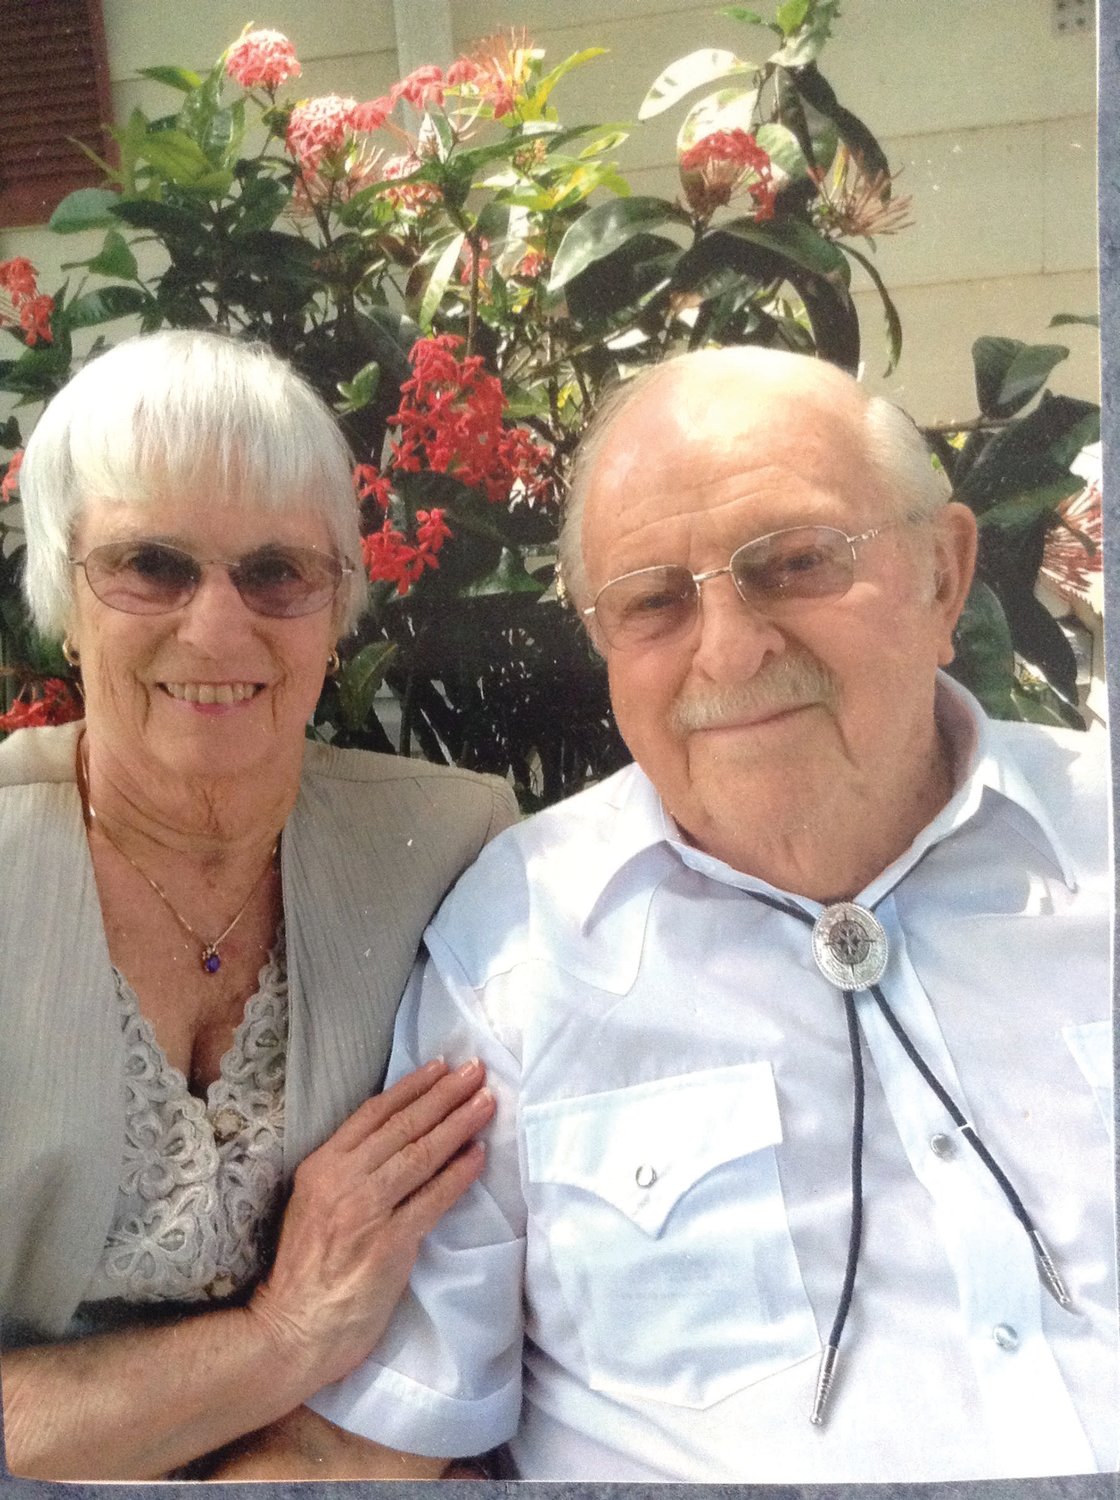 Marlene and Richard Burns were married for 65 years, raised 103 children and visited seven continents together before he passed away in July 2020.